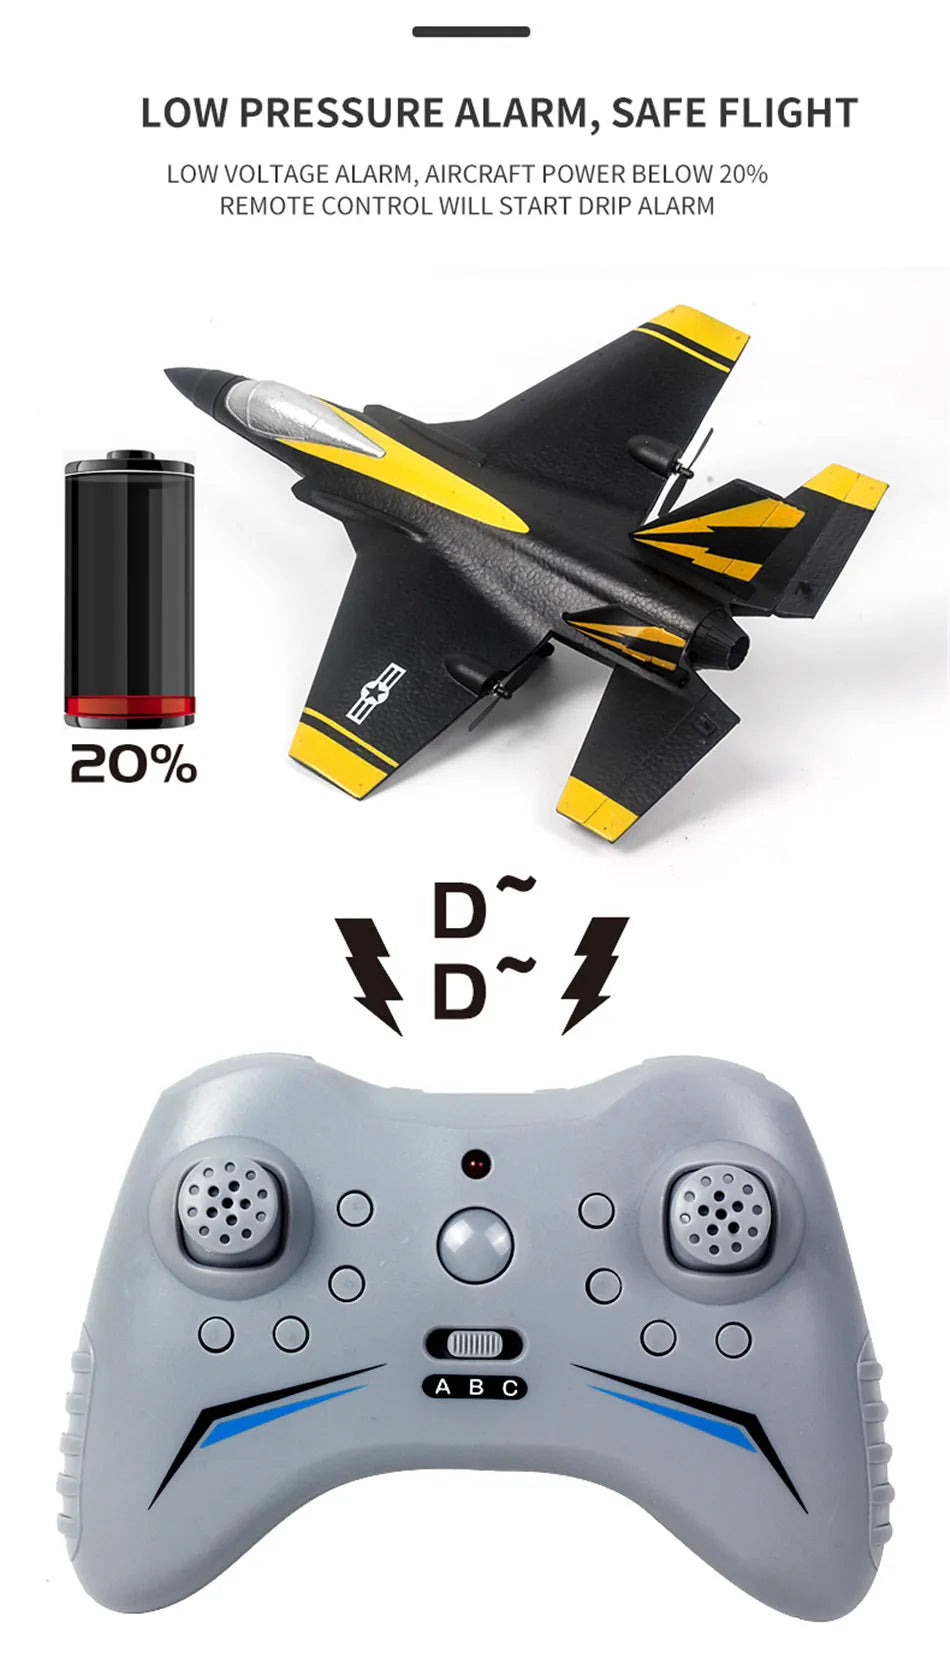 NEW Rc Plane F35 F22 Fighter, AIRCRAFT POWER BELOW 20% REMOTE CONTROL WILL START D